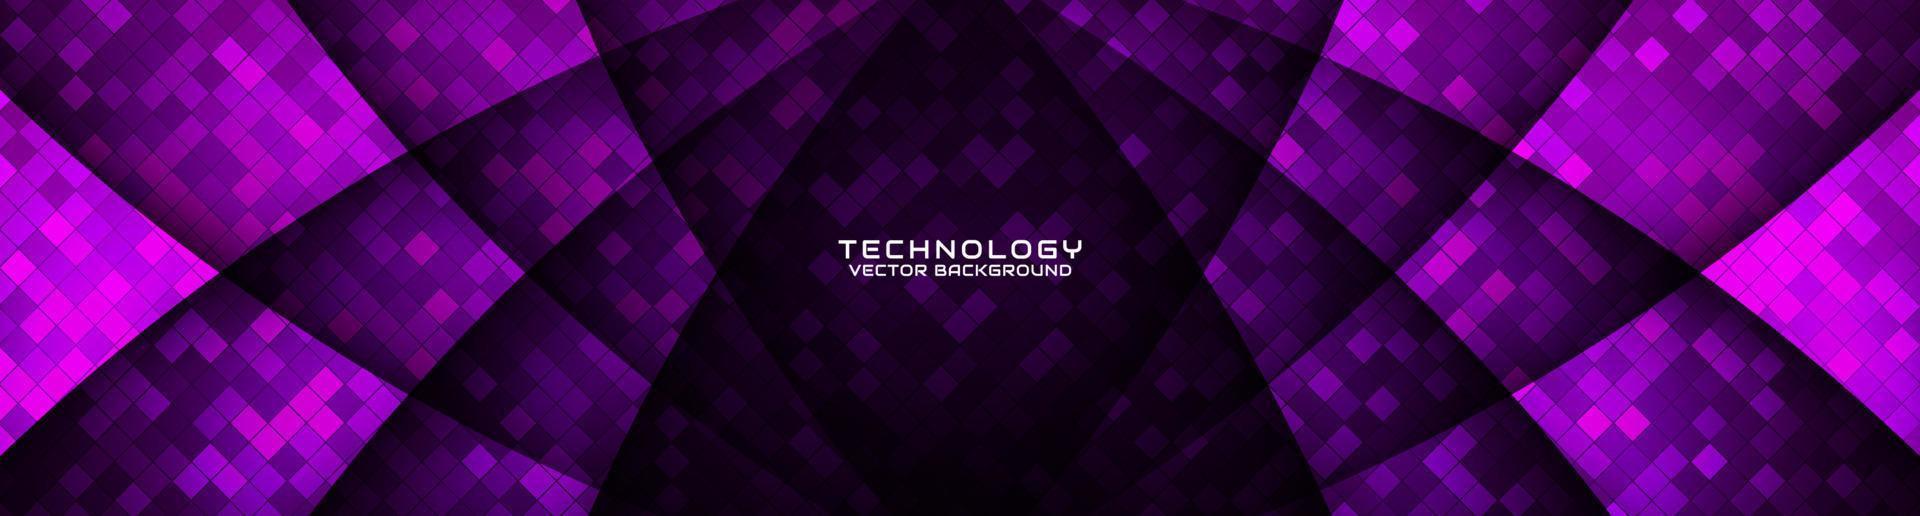 3D purple geometric abstract background overlap layer on dark space with rhombus pattern decoration. Graphic design element cutout effect style concept for banner, flyer, card, or brochure cover vector